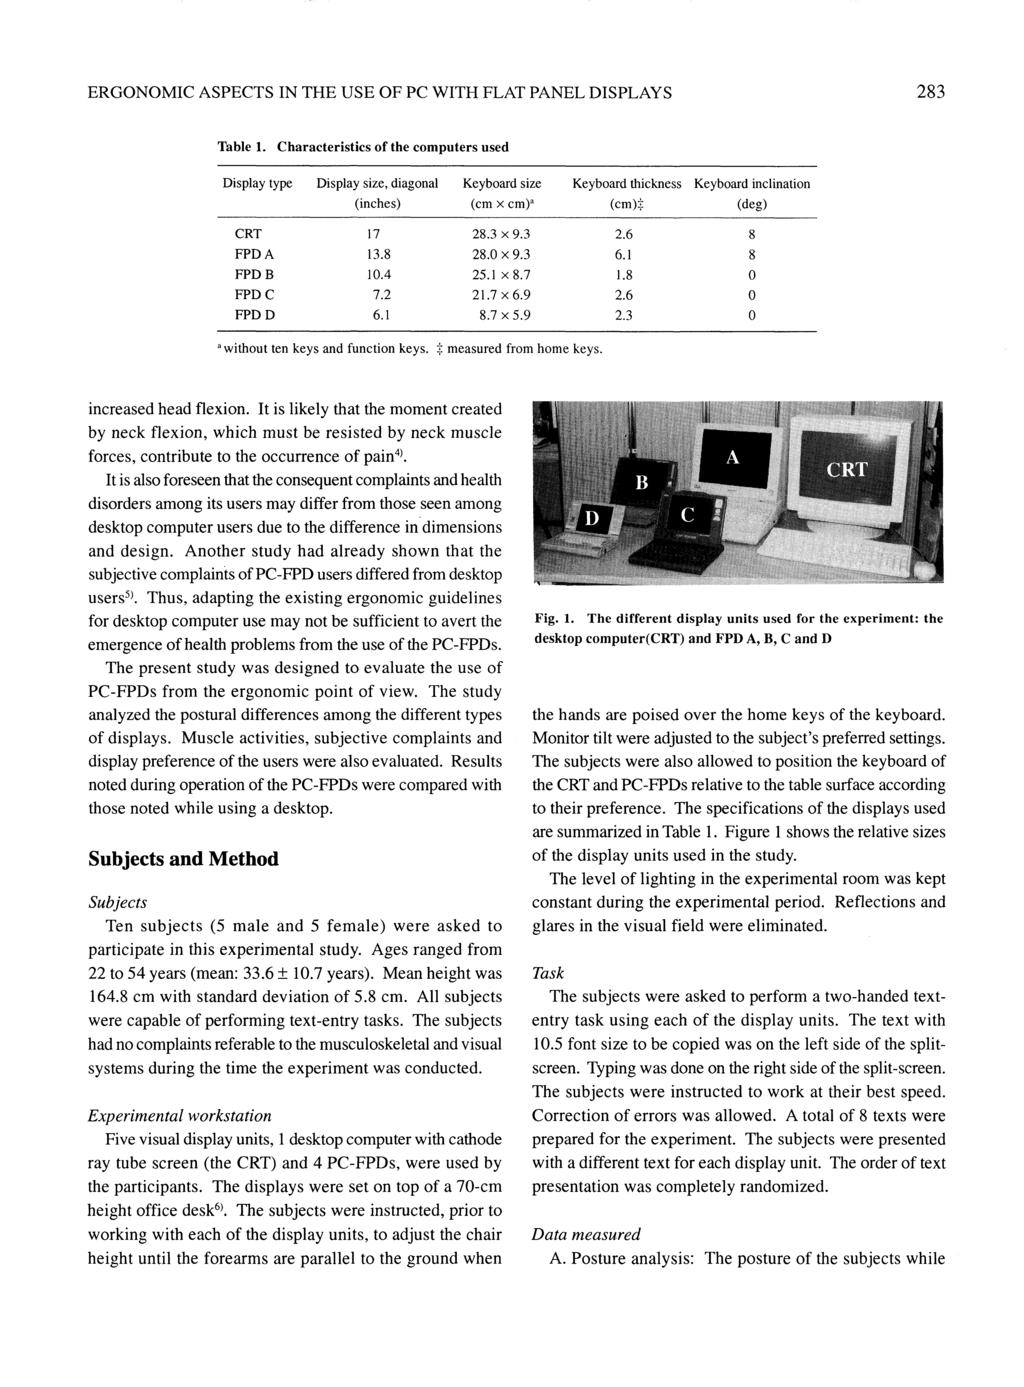 ERGONOMIC ASPECTS IN THE USE OF PC WITH FLAT PANEL DISPLAYS 283 Table 1. Characteristics of the computers used increased head flexion.